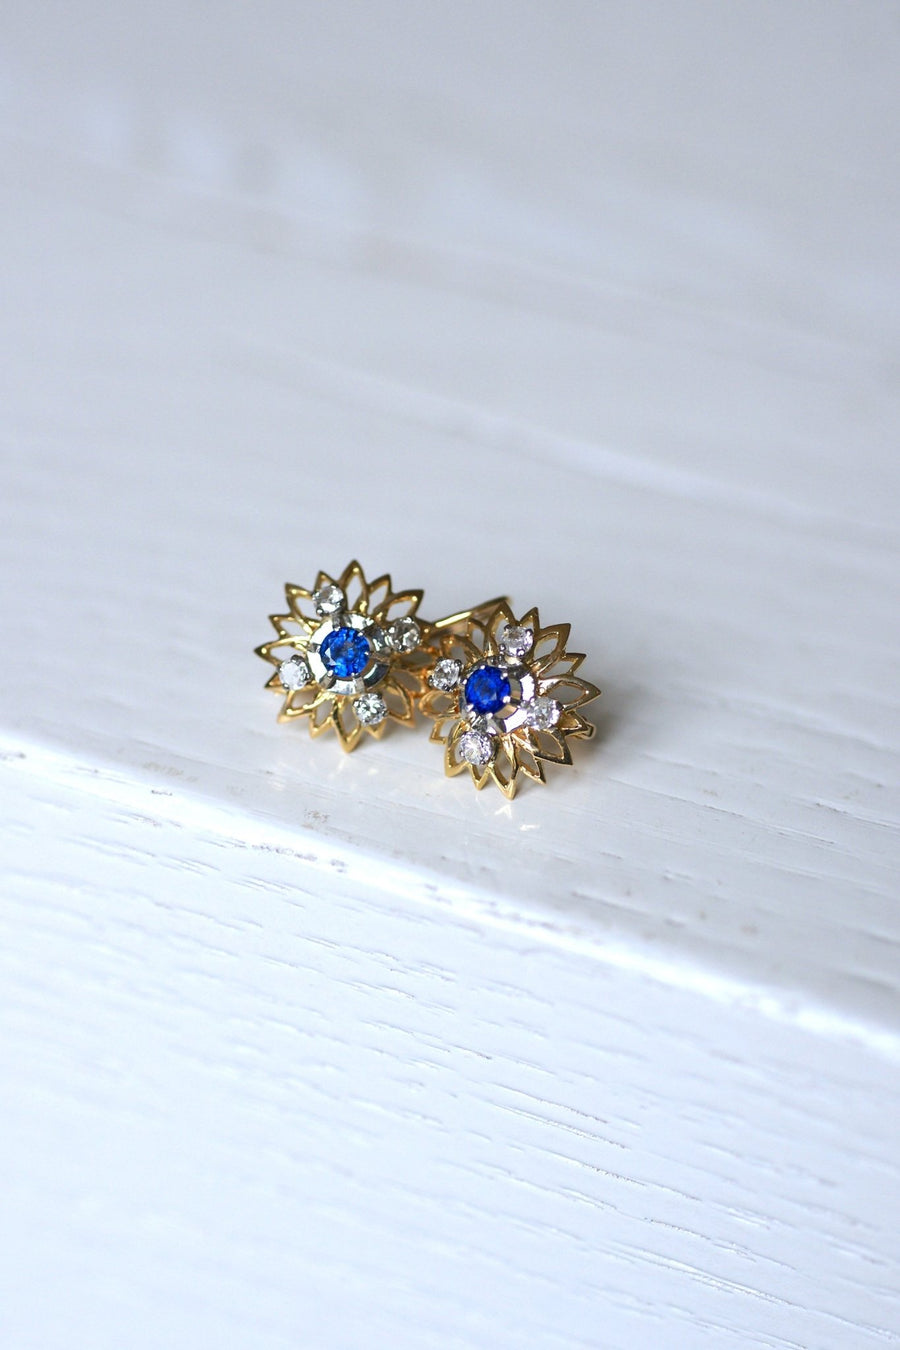 Vintage gold, sapphire and diamond daisy earrings - Penelope Gallery